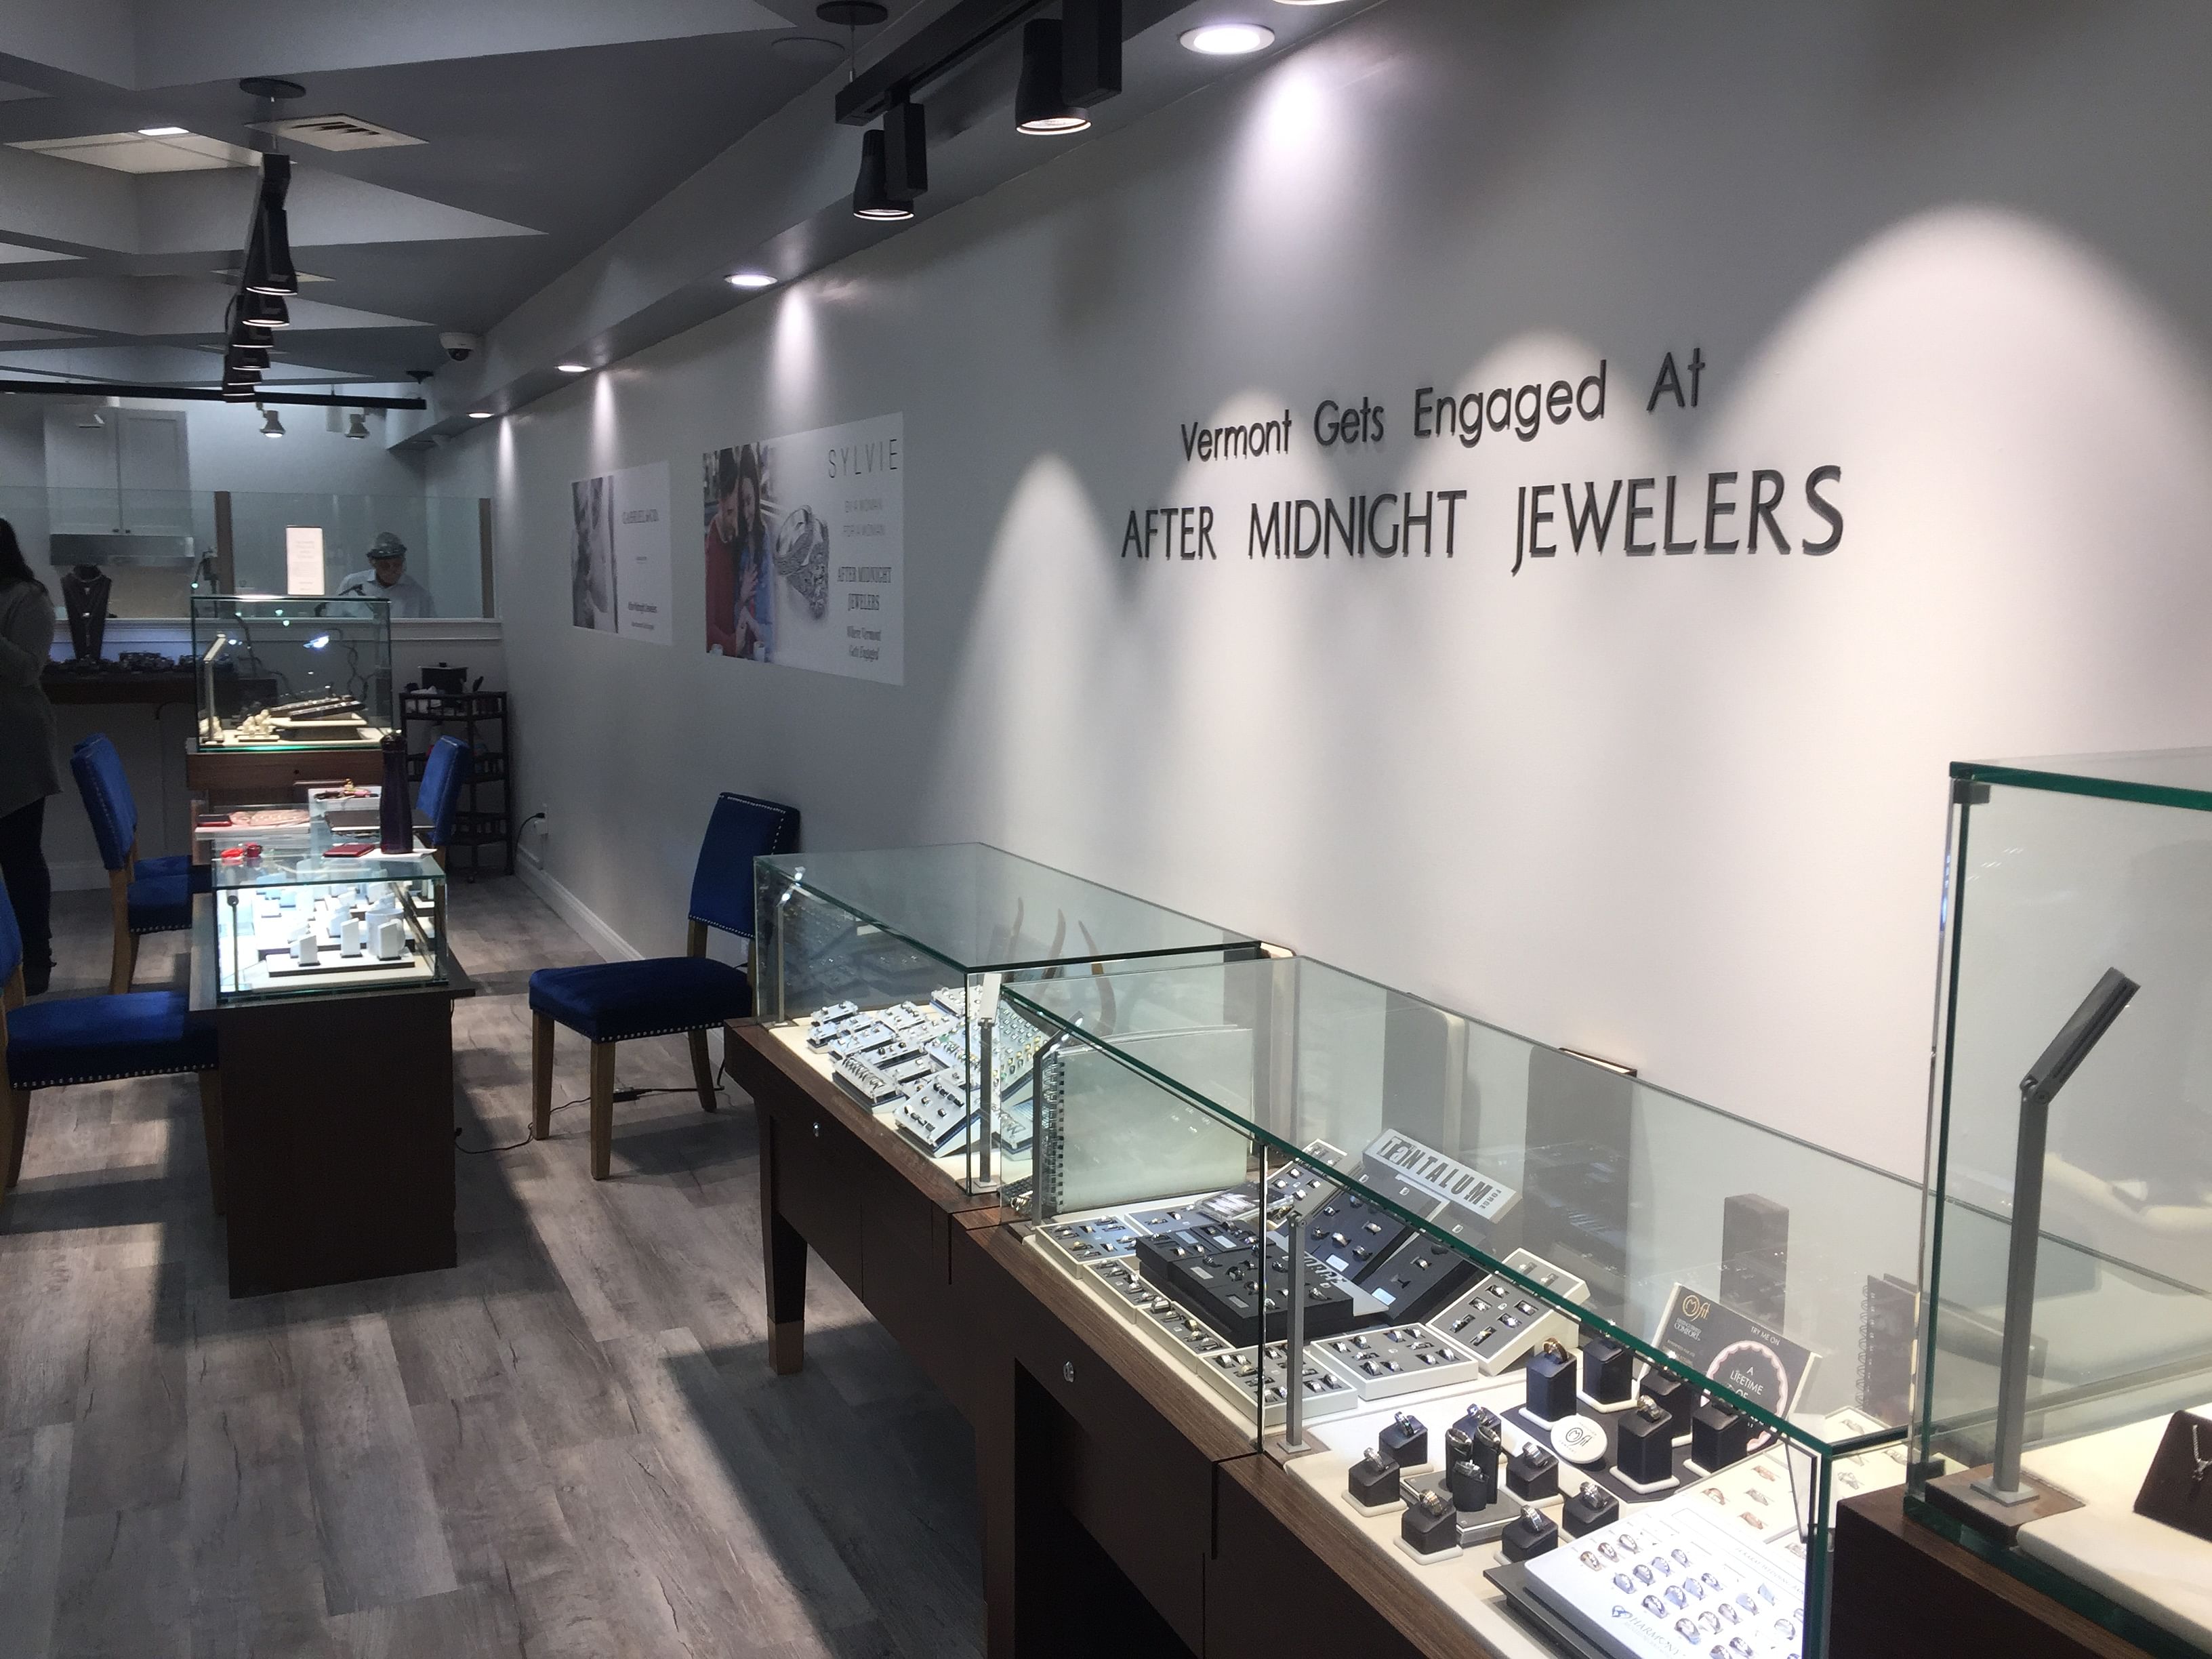 After Midnight Jewelers